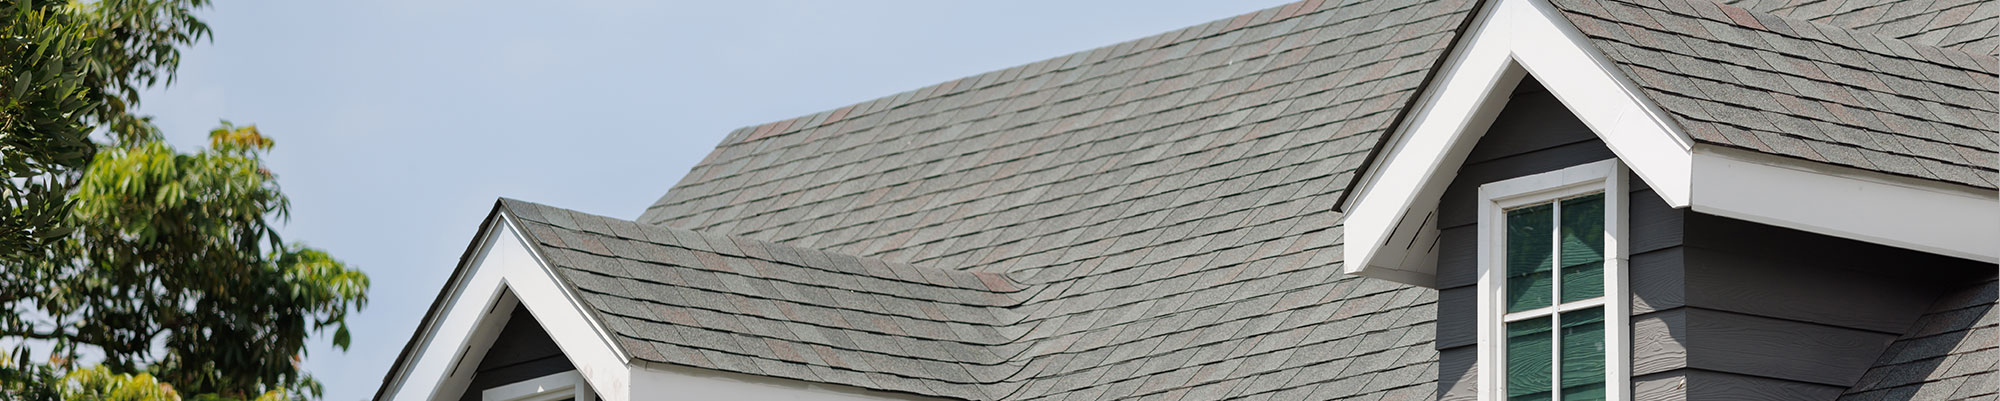 Sturtevant roof replacement company